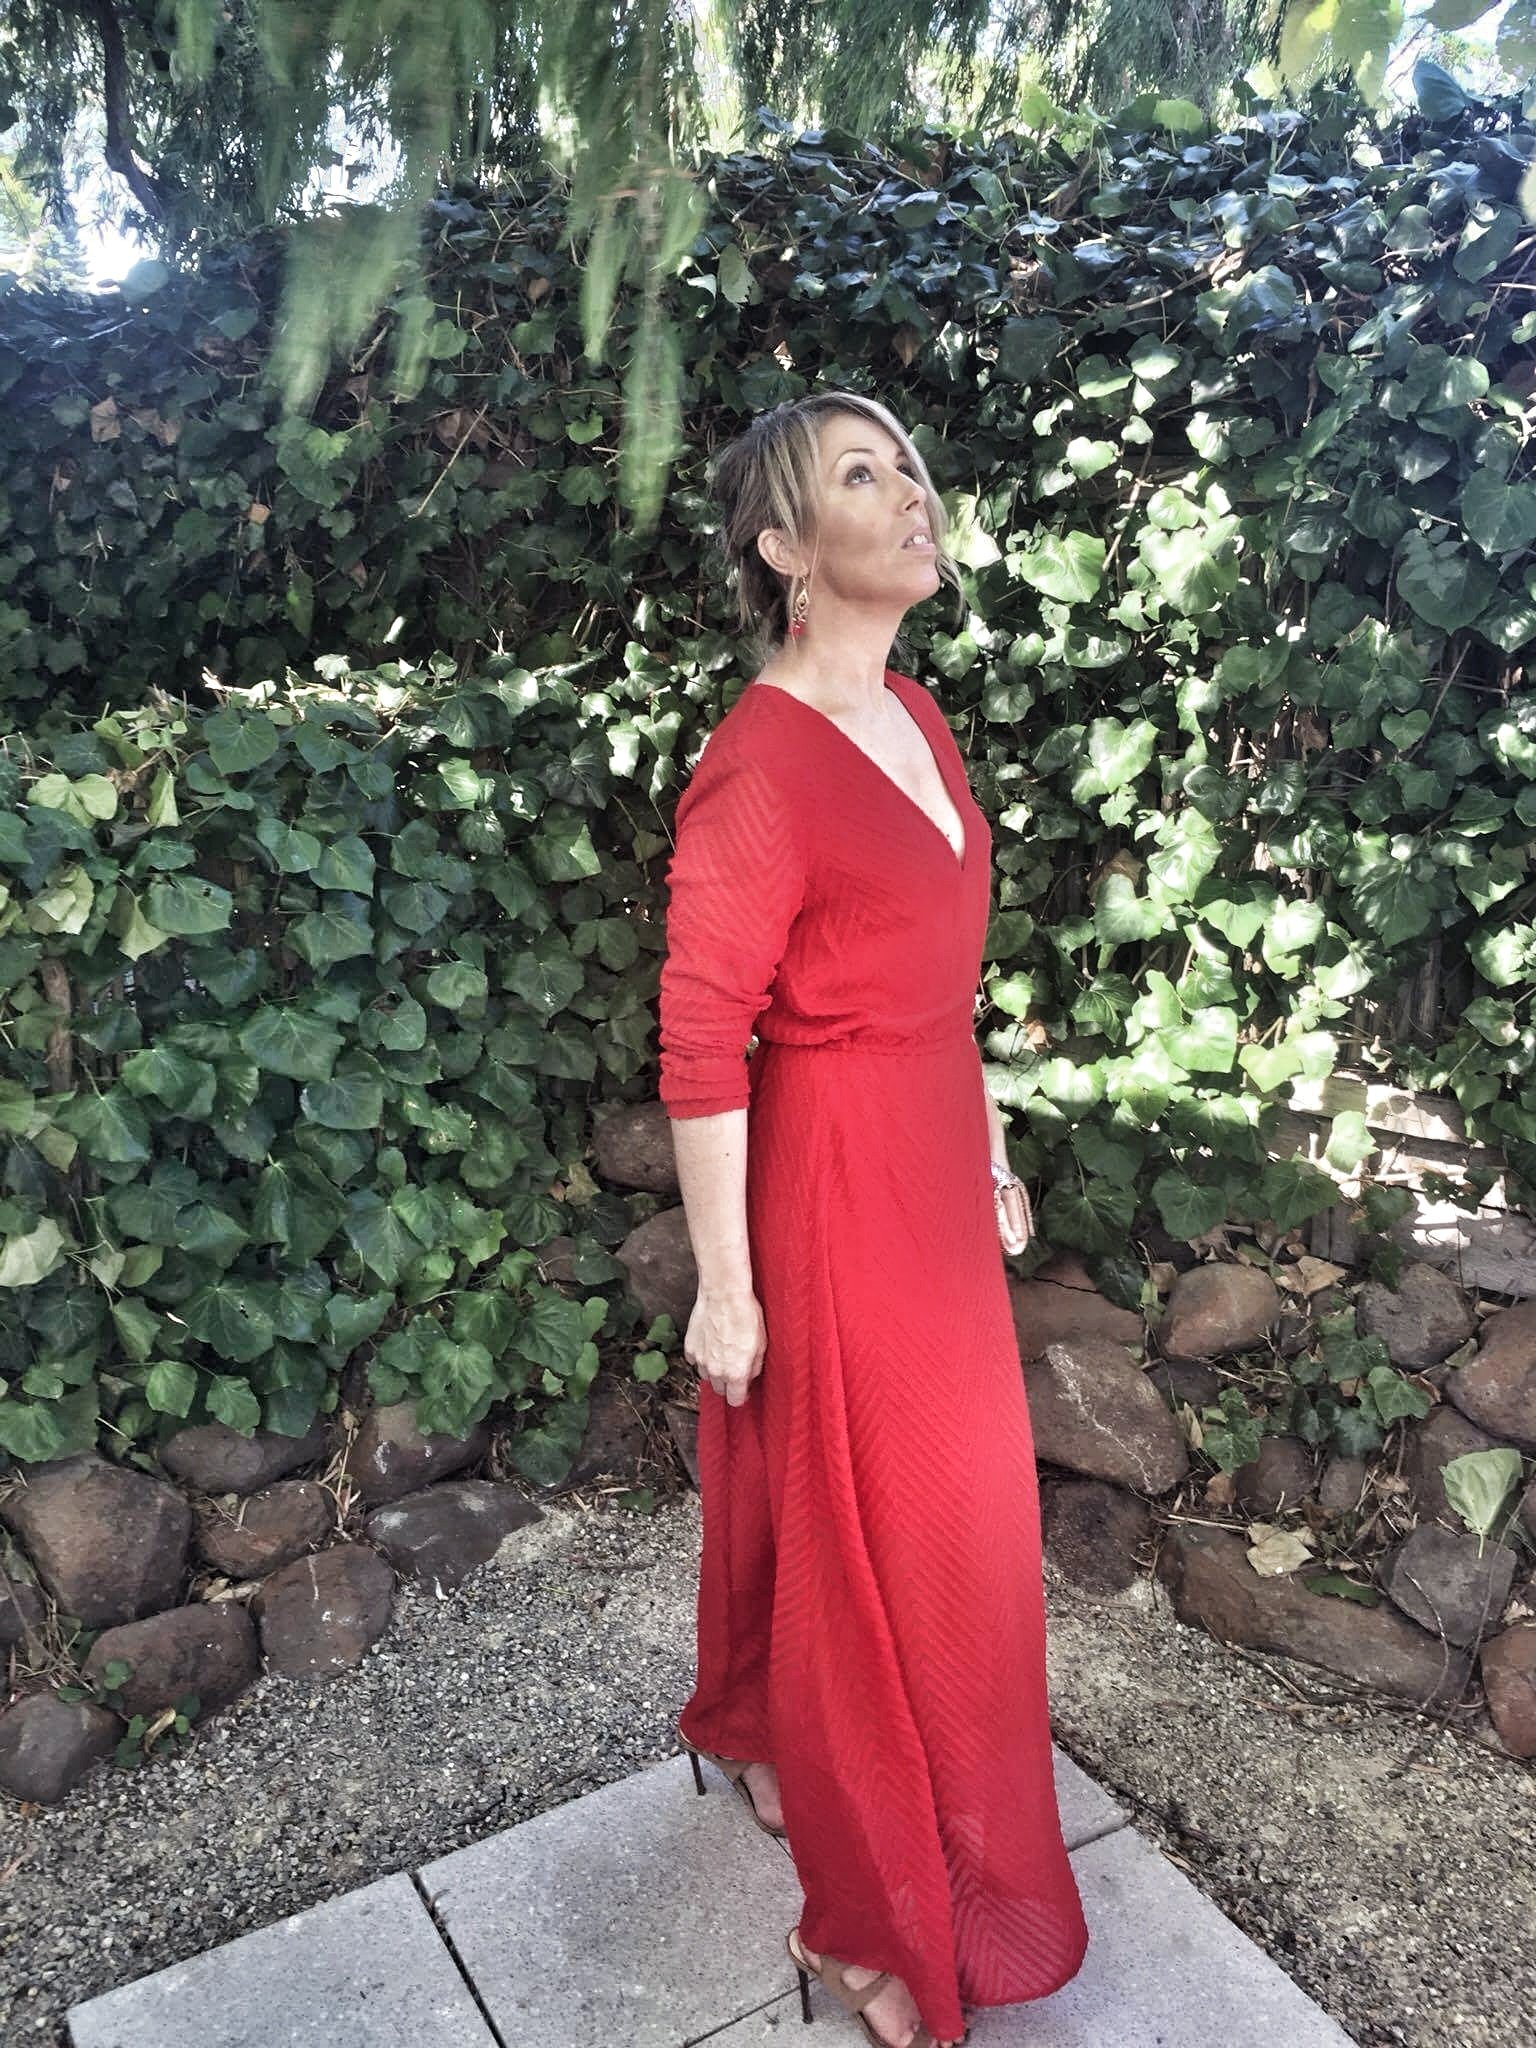 The Red Dress | Style & Life by Susana